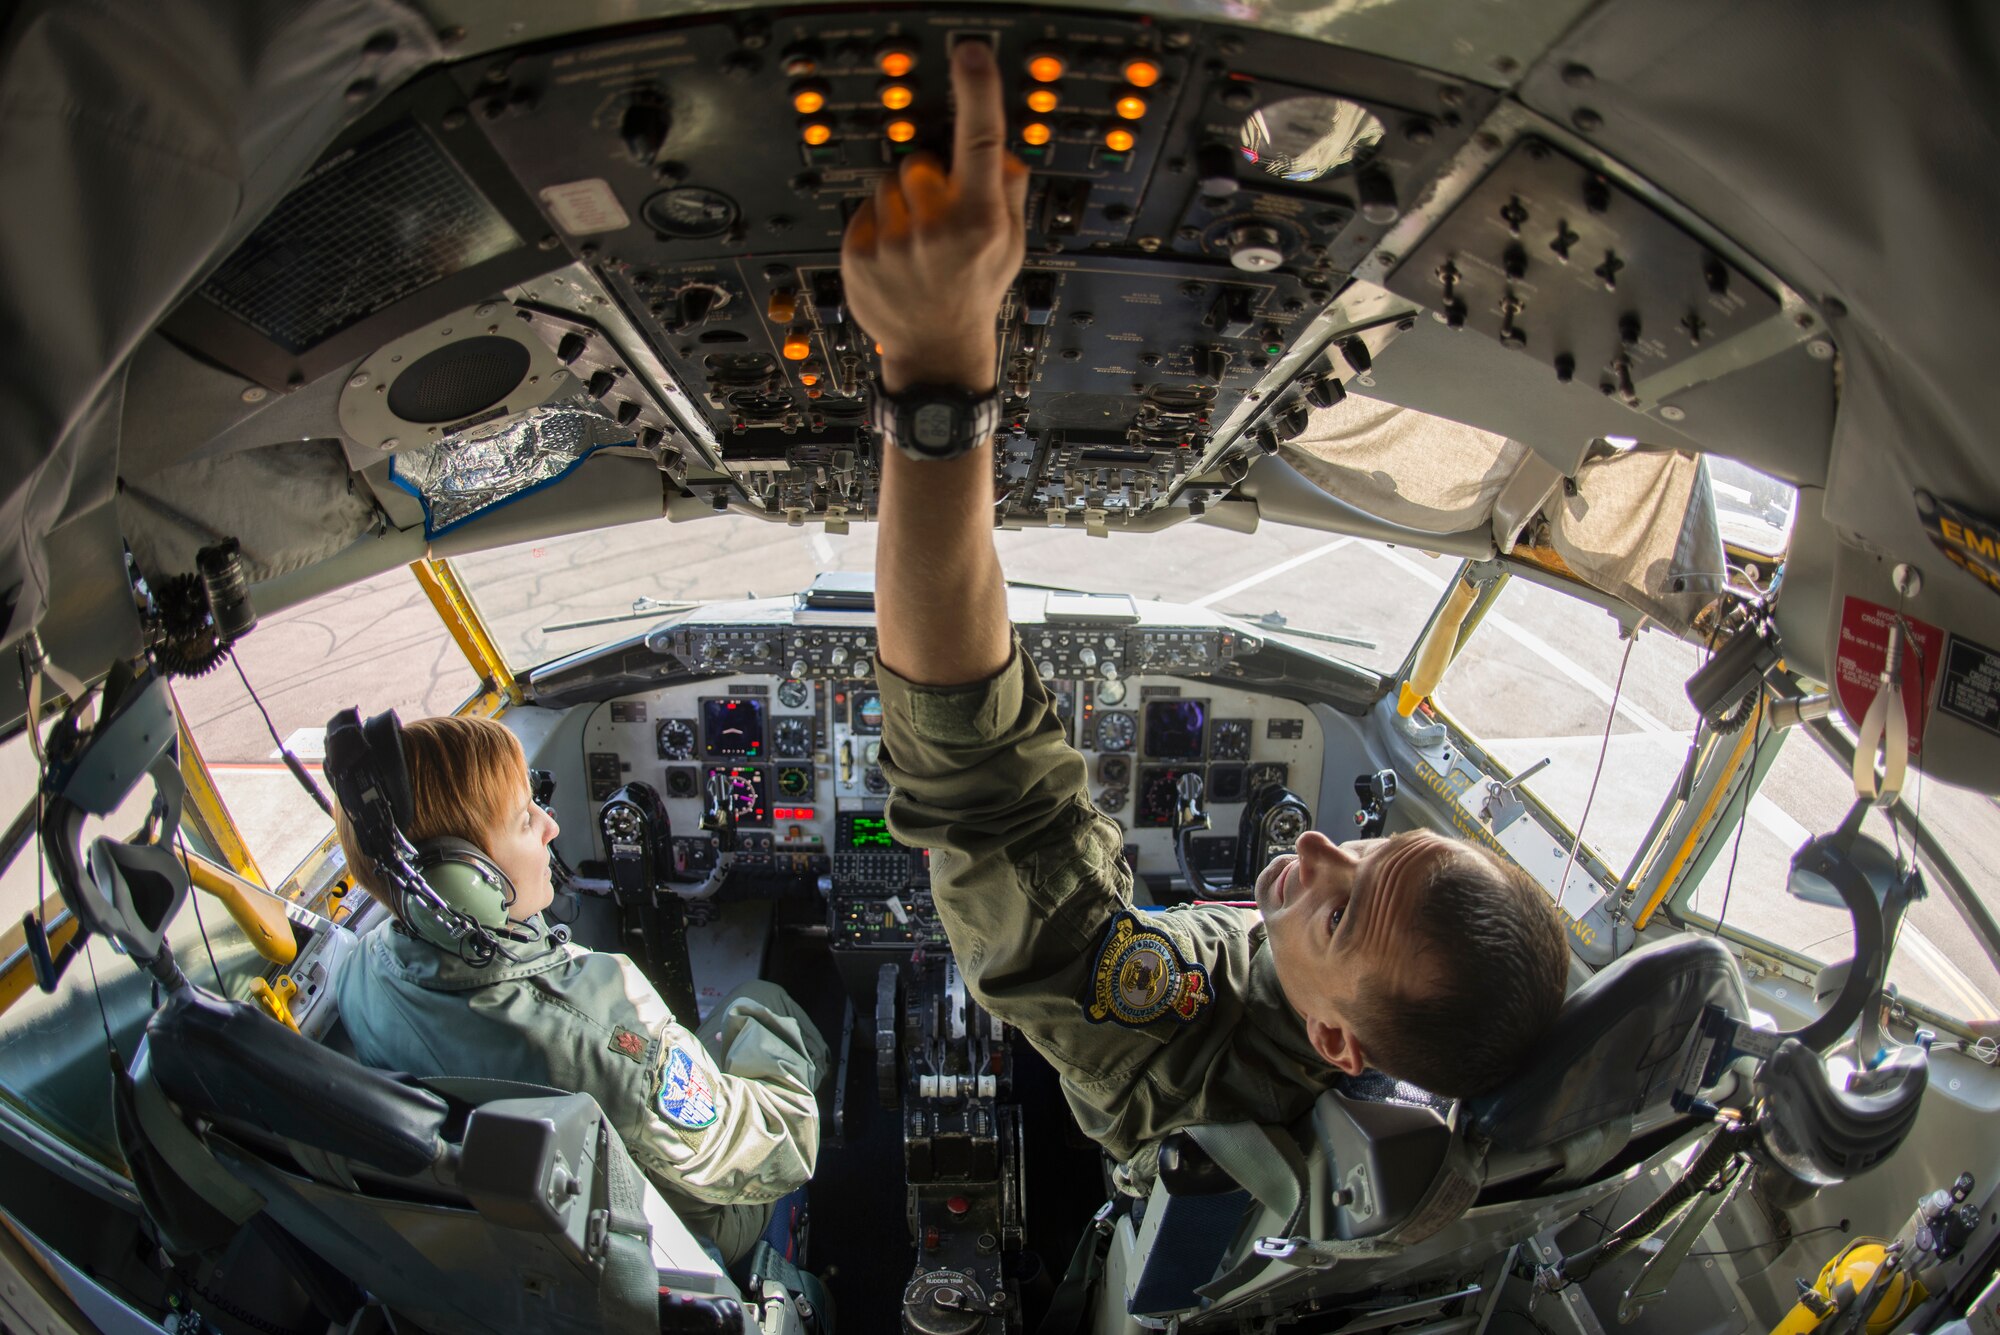 U.S. Air Force Maj. Micah Yost, 351st Air Refueling Squadron pilot, prepares for take-off aboard a KC-135 Stratotanker prior to a flight at RAF Mildenhall, England, Sept. 13, 2018. The 100th ARW supported training with a U.S. Air Force B-52 and Romanian Air Force F-16s in the airspace above Romania.(U.S. Air Force photo by Tech. Sgt. Emerson Nuñez)